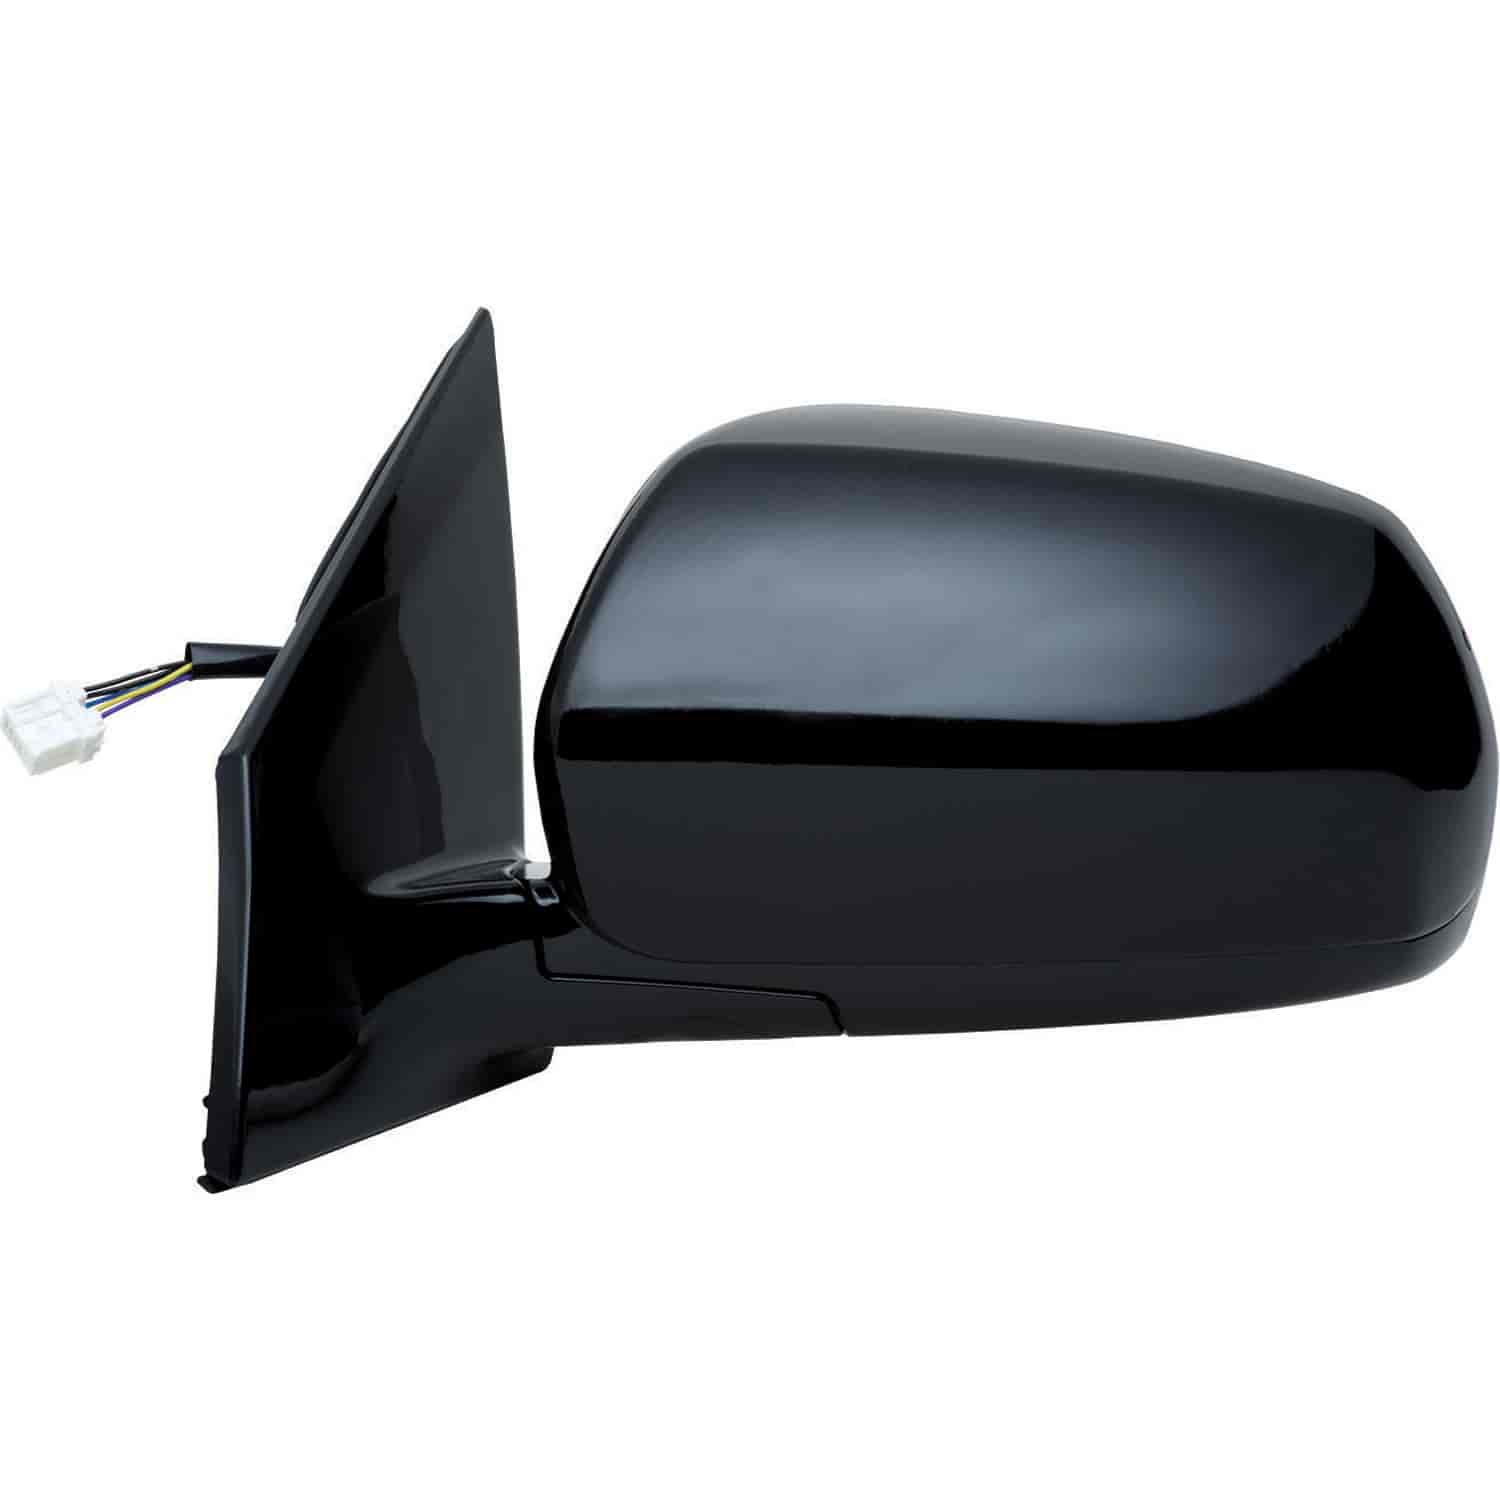 OEM Style Replacement mirror for 05-07 Nissan Murano driver side mirror tested to fit and function l